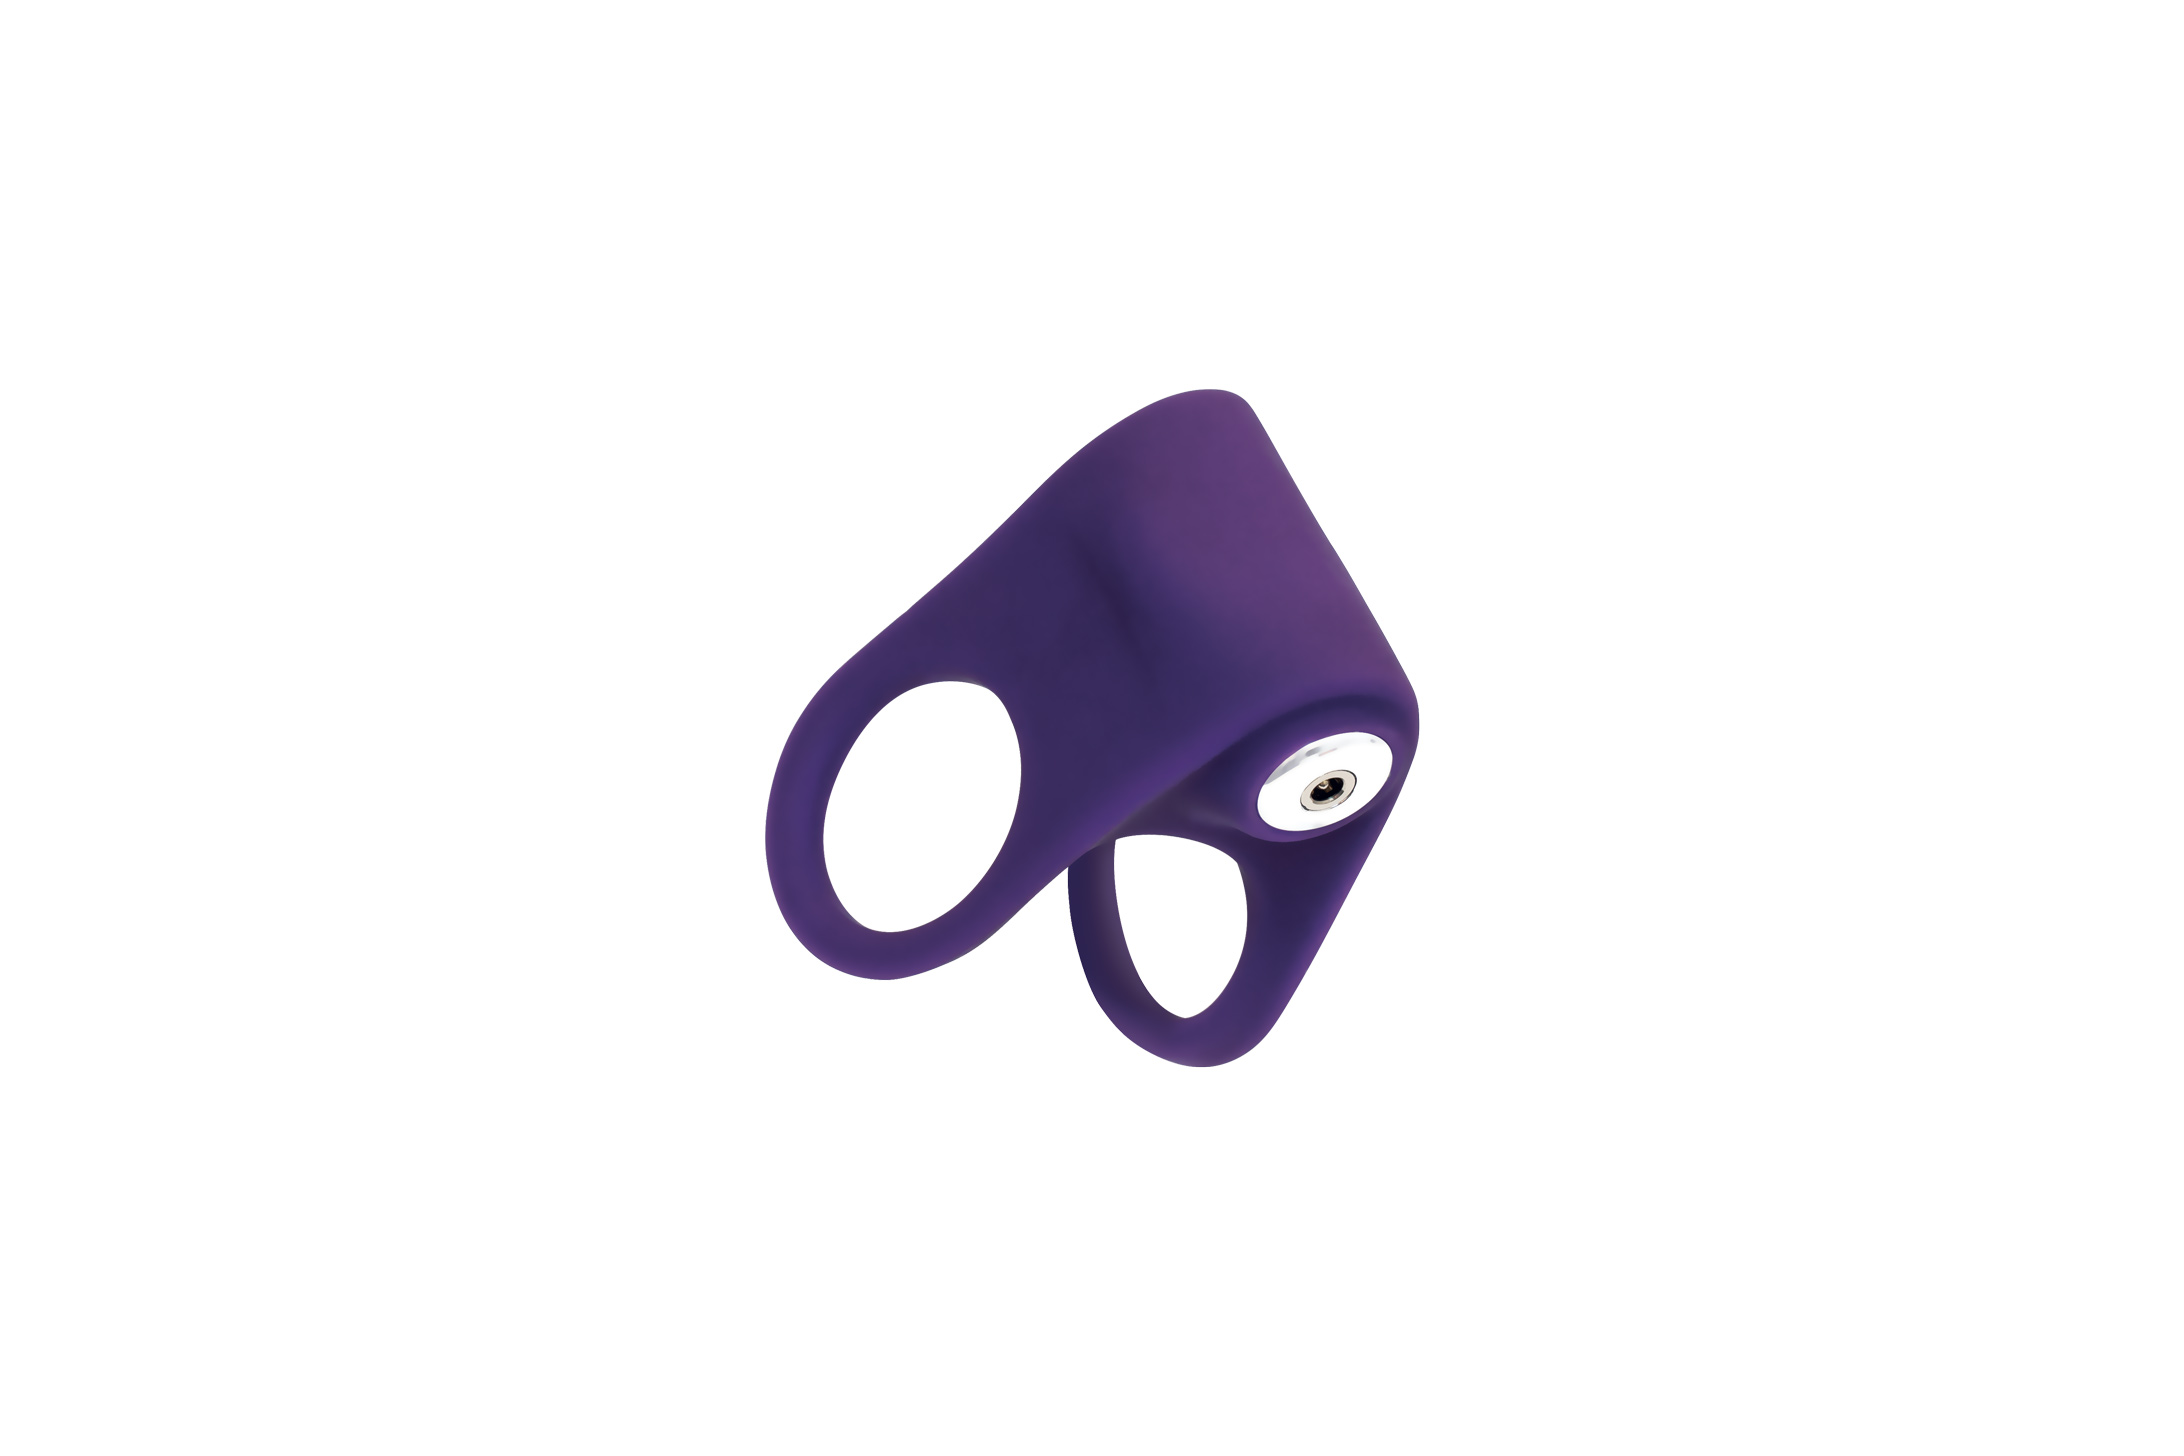 hard rechargeable c ring purple 